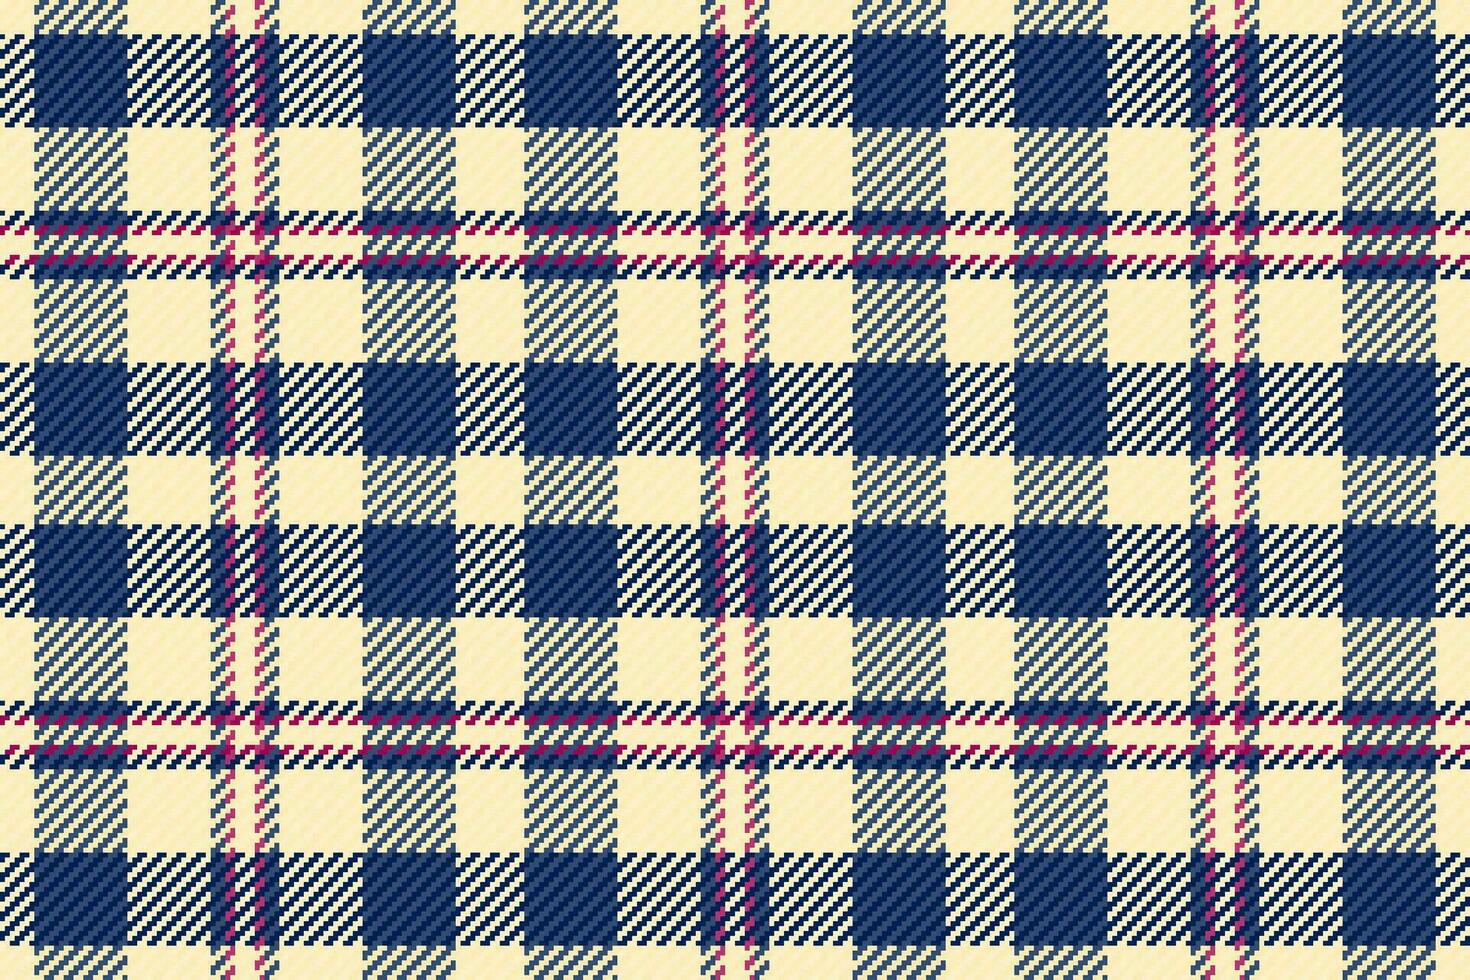 60s vector pattern seamless, printout textile tartan background. Micro fabric check texture plaid in blue and blanched almond colors.